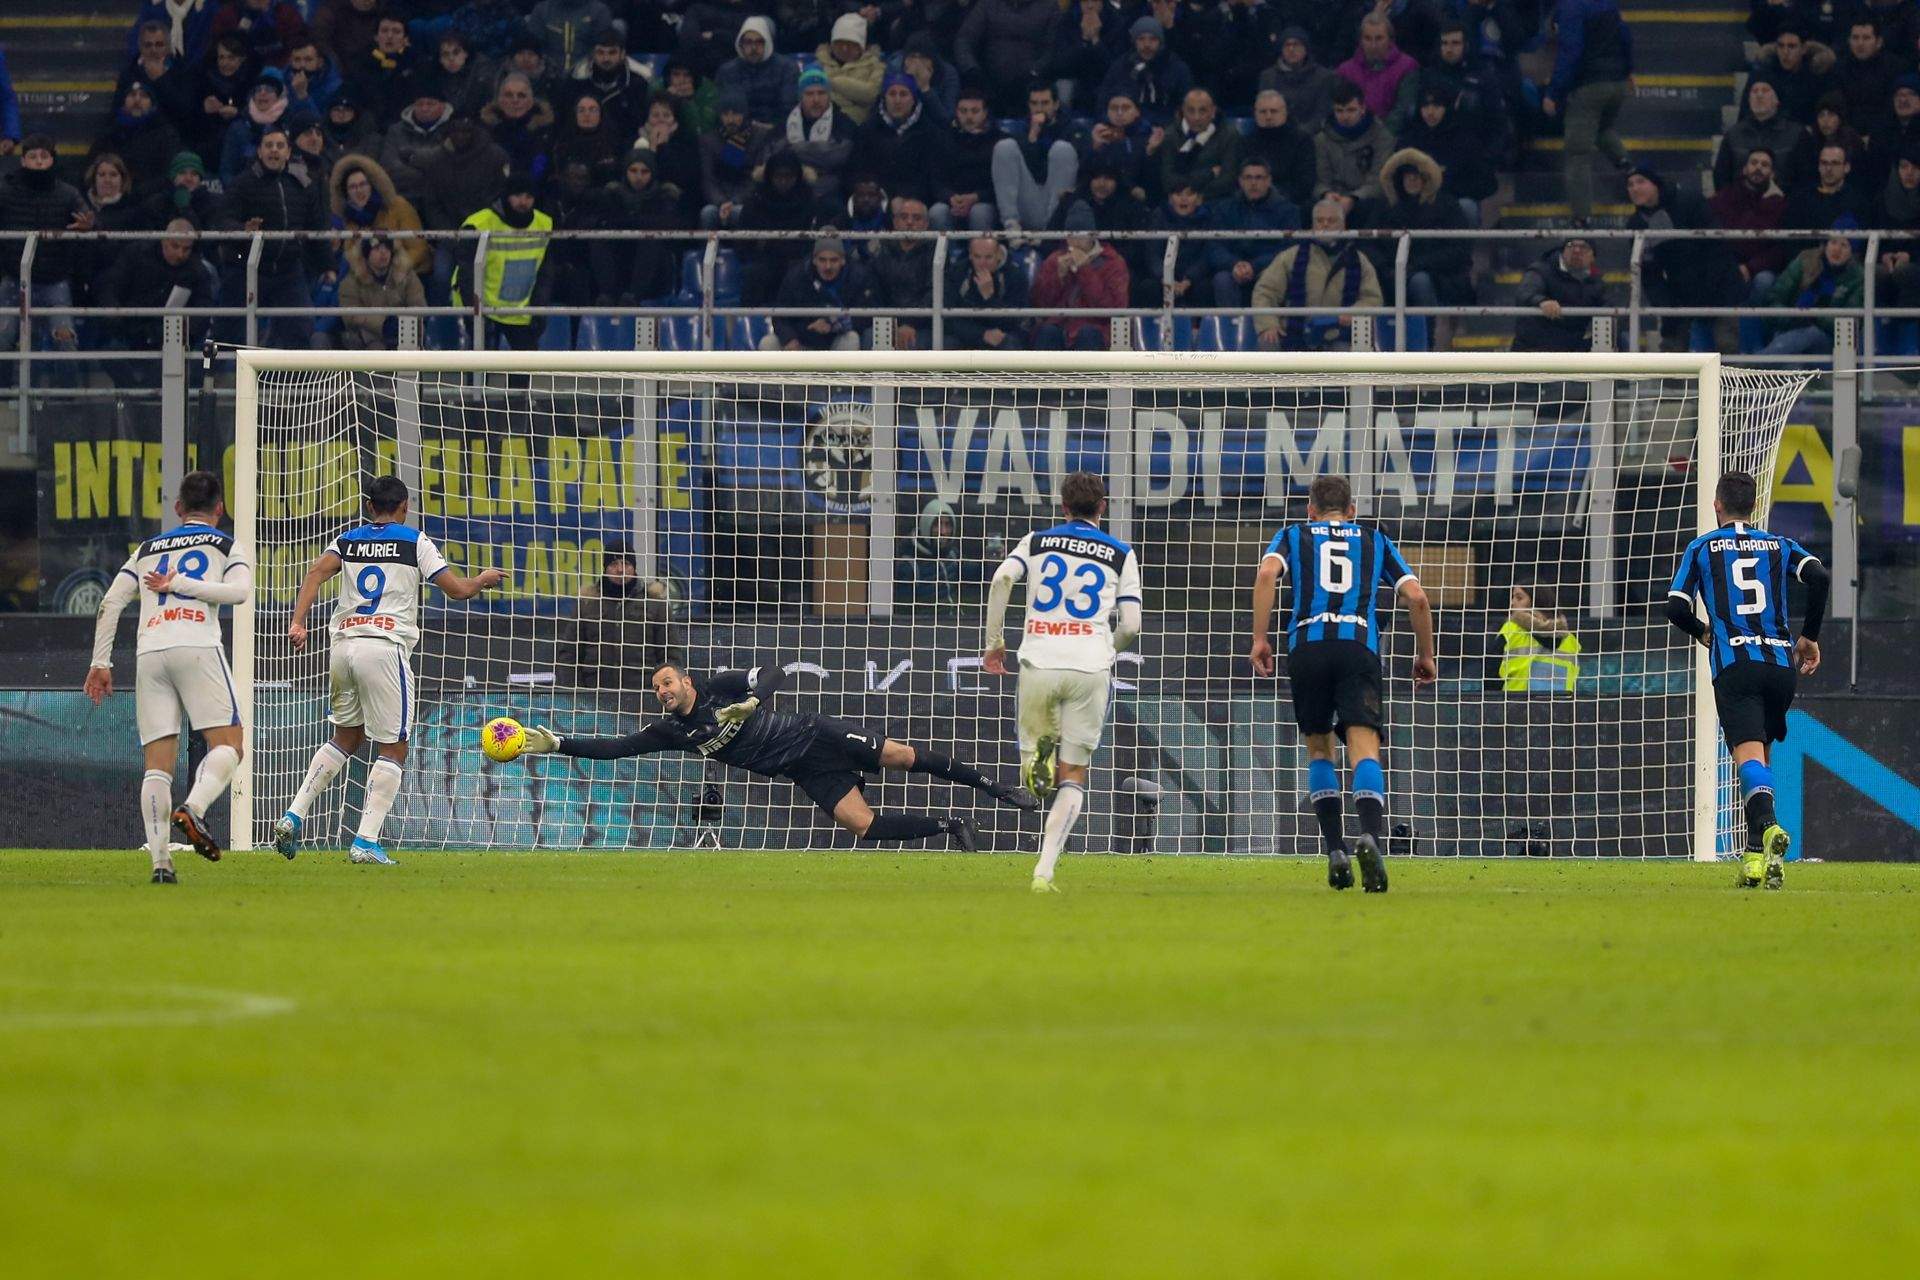 Samir Handanovic of FC Internazionale saves penalty on Luis Muriel of Atalanta BC during the Serie A match between FC Internazionale and Atalanta BC at Stadio Giuseppe Meazza Milan Italy on 11 January 2020. (Photo Fabrizio Carabelli) PILKA NOZNA SEZON 2019/2020 LIGA WLOSKA FOT. SPORTPHOTO24/NEWSPIX.PL ENGLAND OUT! --- Newspix.pl *** Local Caption *** www.newspix.pl mail us: info@newspix.pl call us: 0048 022 23 22 222 --- Polish Picture Agency by Ringier Axel Springer Poland